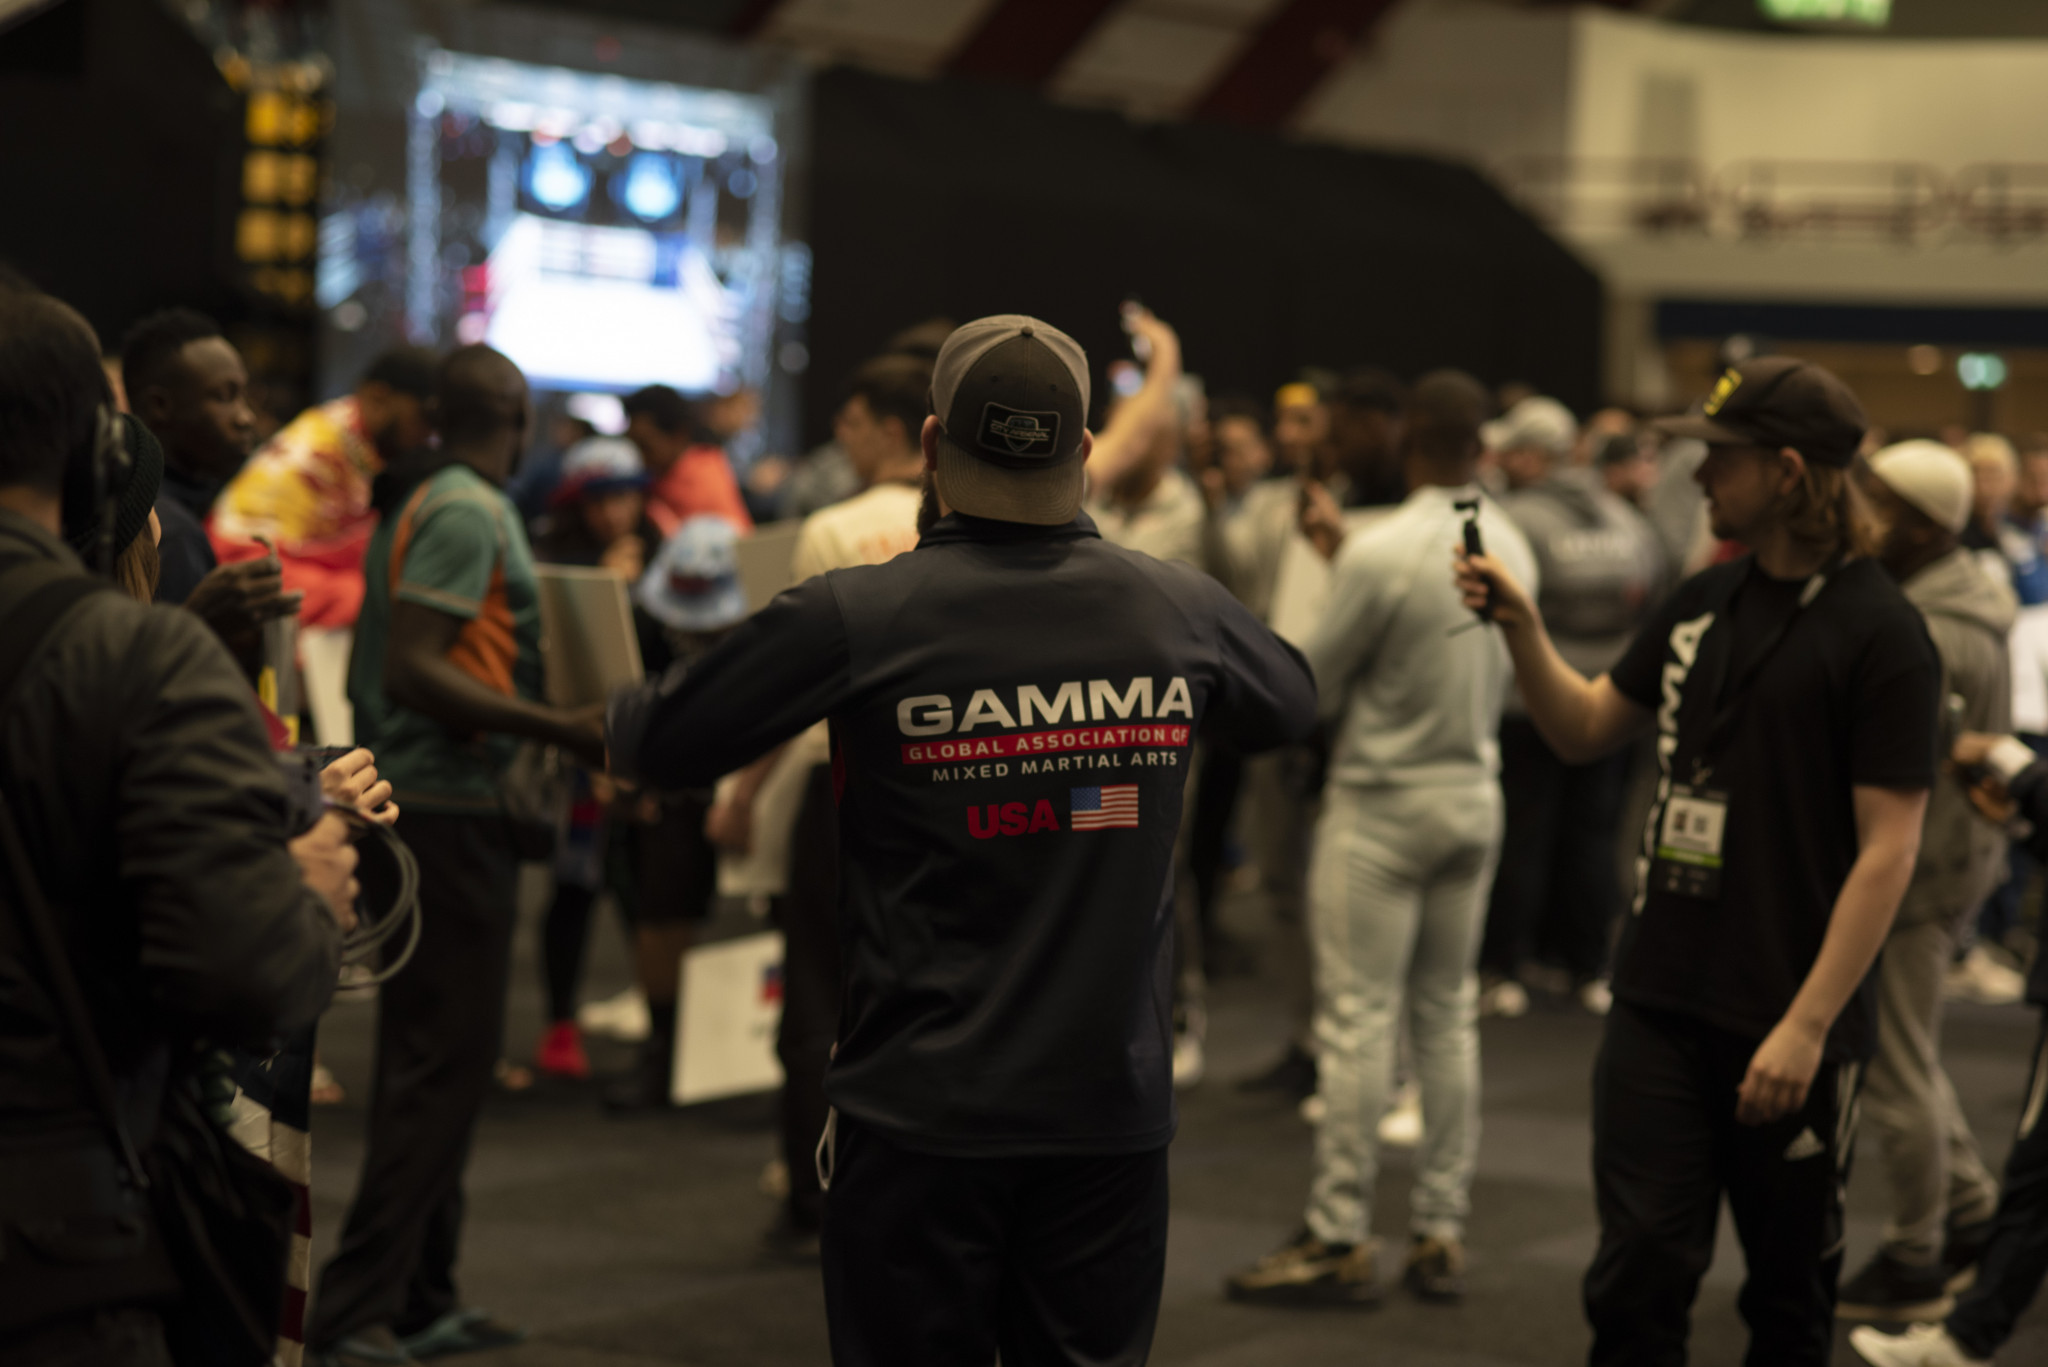 The Opening Ceremony promoted a festival atmosphere as GAMMA's member federations were all in one place for the first time since the 2019 World Championships ©GAMMA